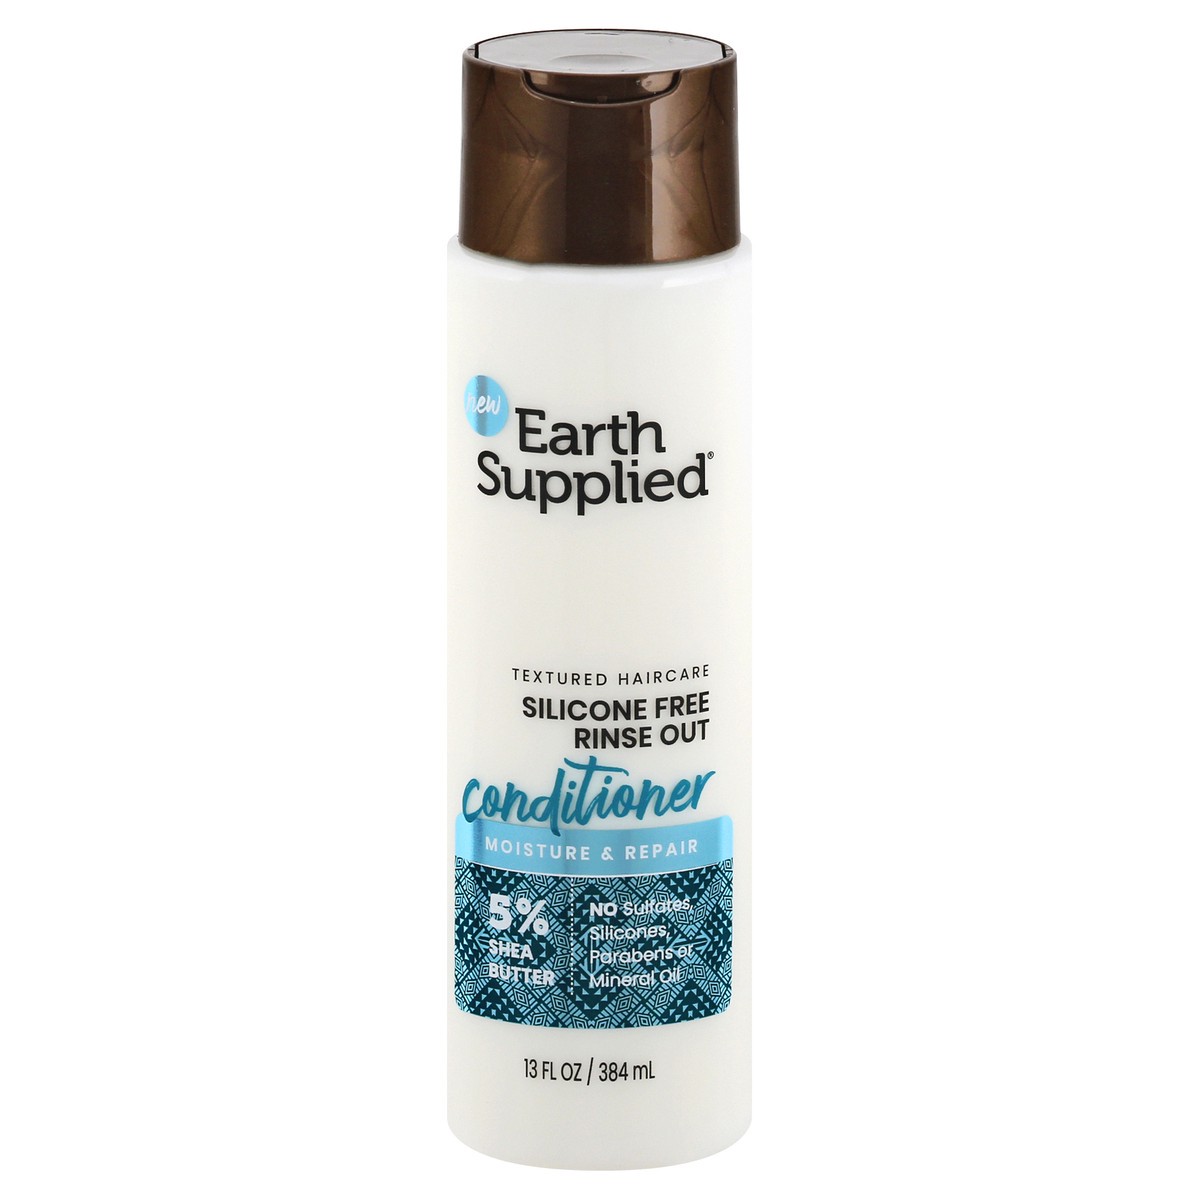 slide 1 of 9, Earth Supplied Moisture & Repair Silicone Free Rinse Out Conditioner 13 oz, 13 oz